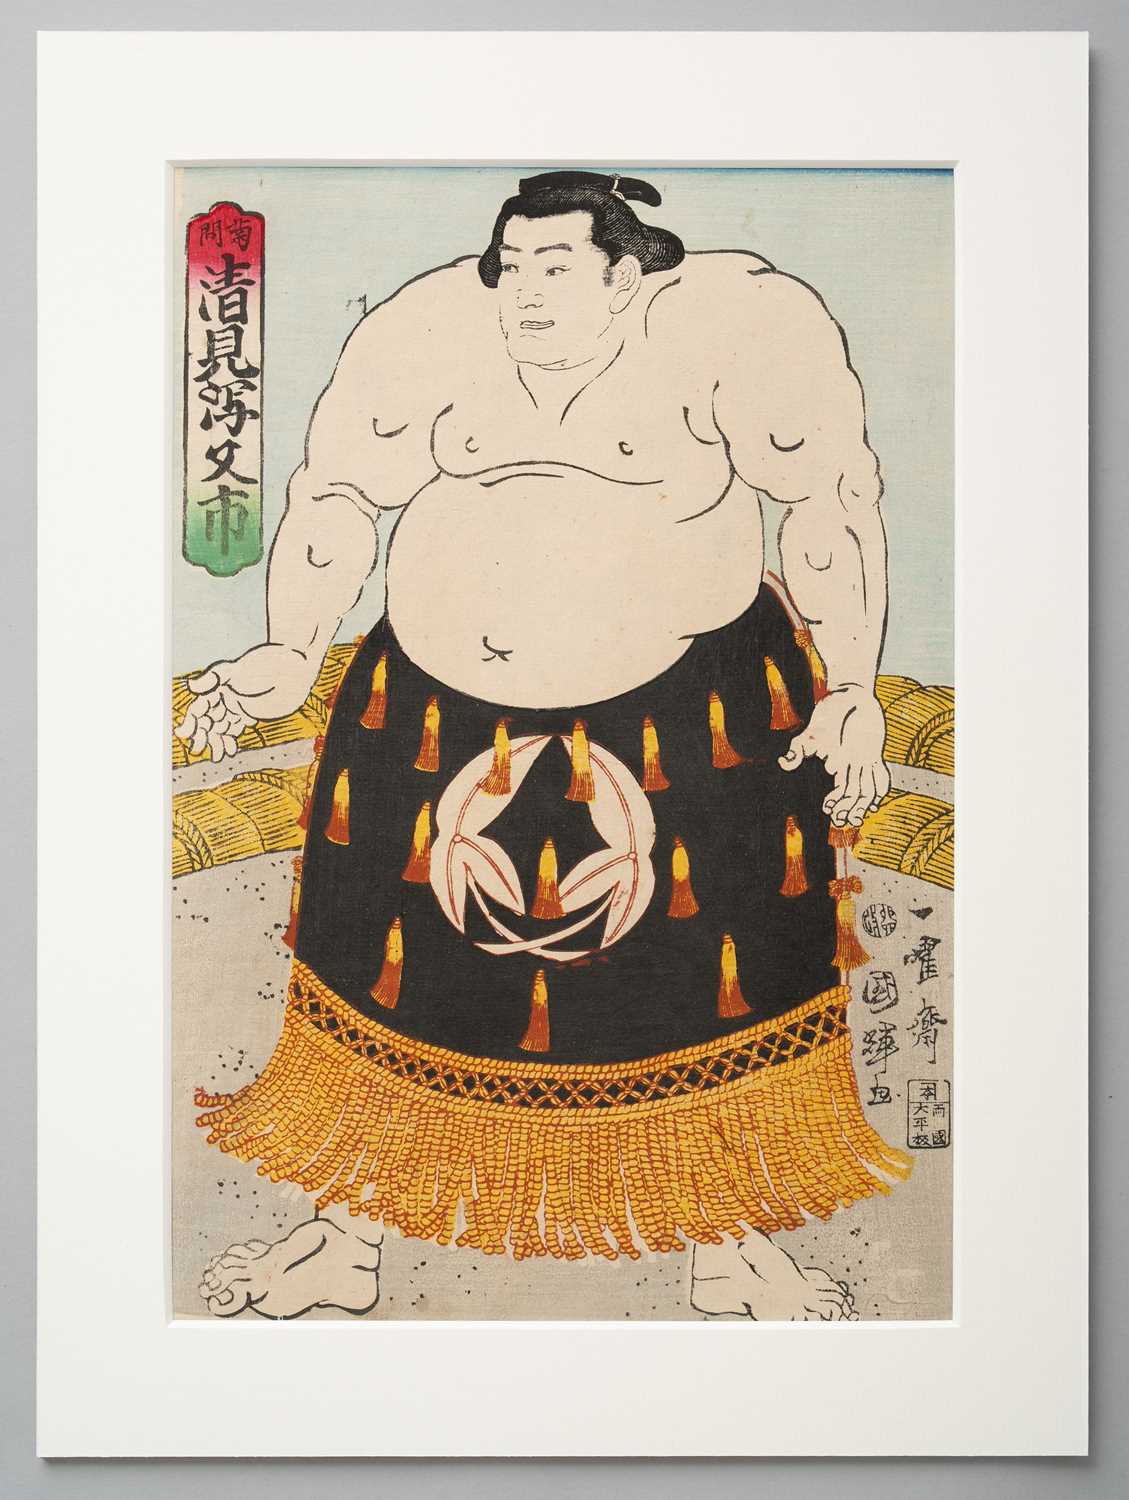 NO RESERVE UNIDENTIFIED ARTISTS SUMO-E (PORTRAITS OF SUMO WRESTLERS) EDO OR MEIJI, 19TH CENTURY A - Image 3 of 9